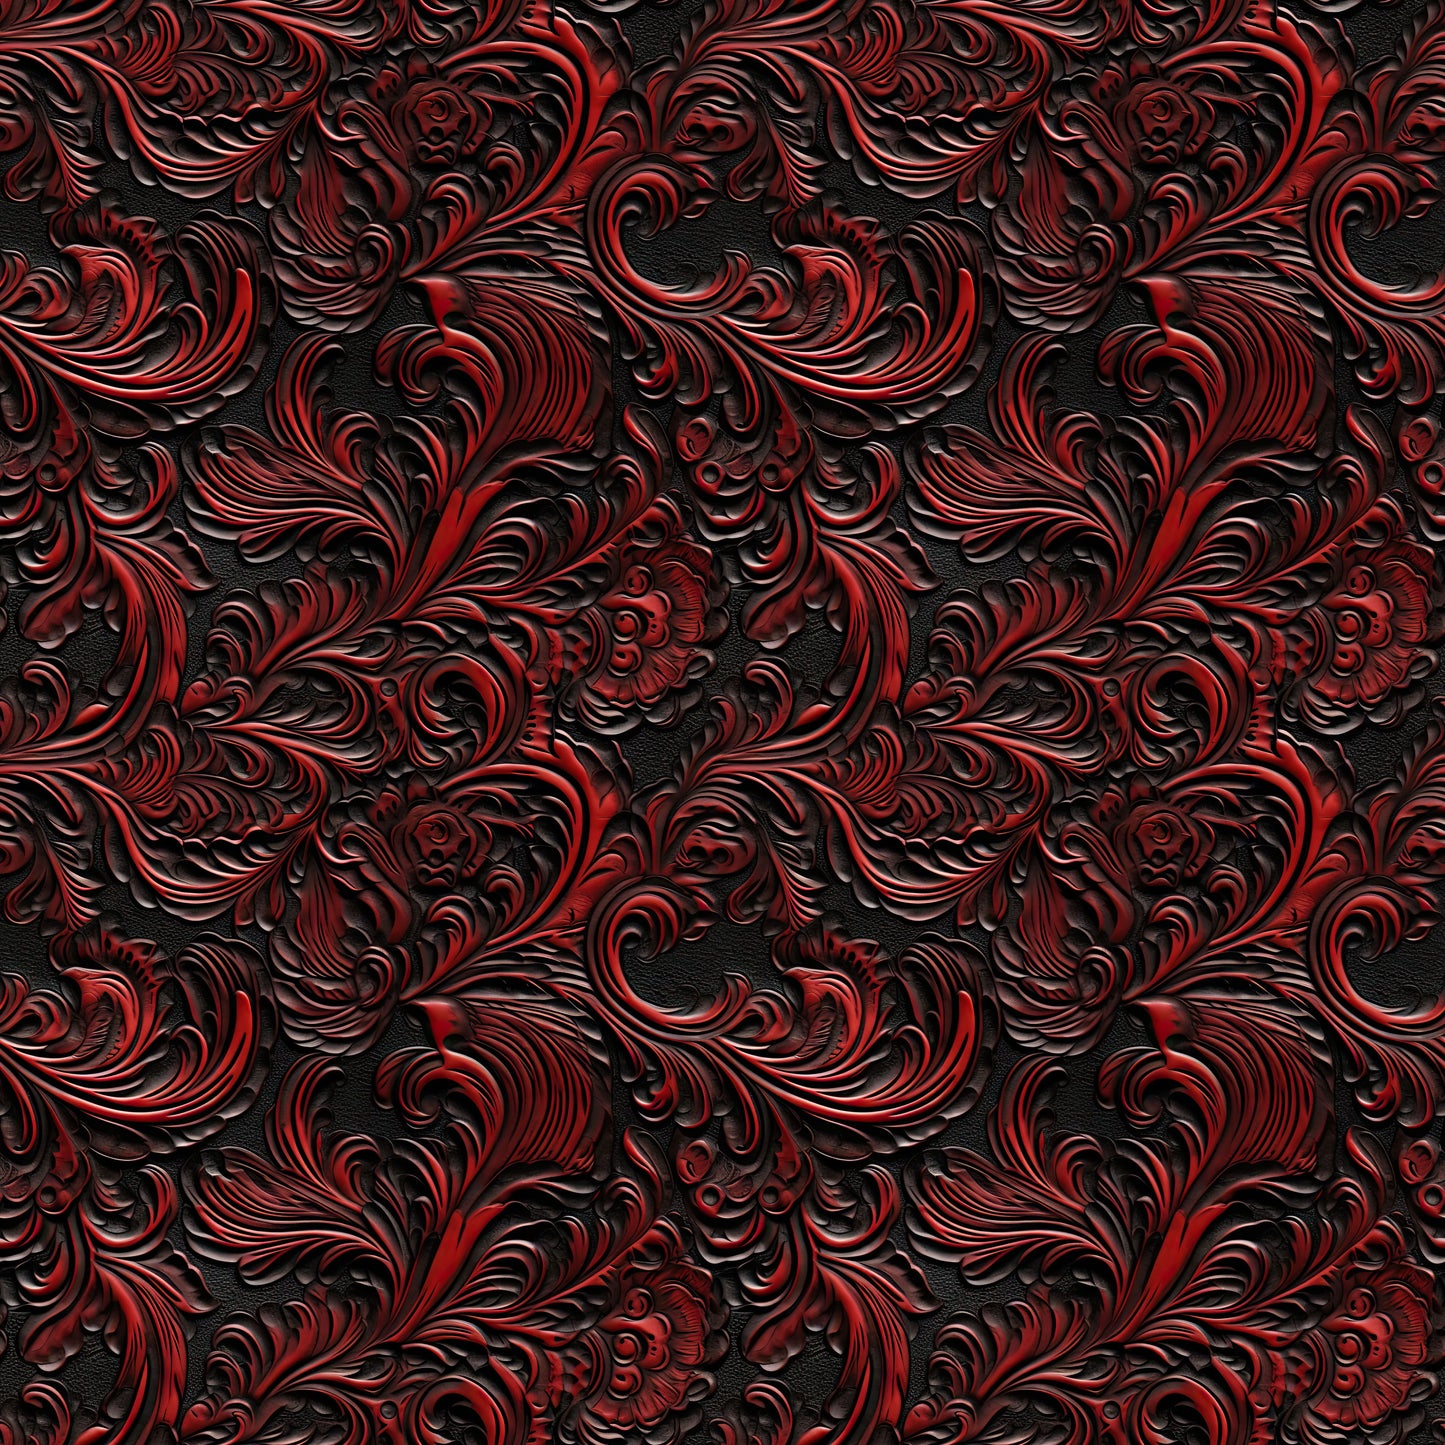 RED AND BLACK LEATHER VINYL - MULTIPLE VARIATIONS